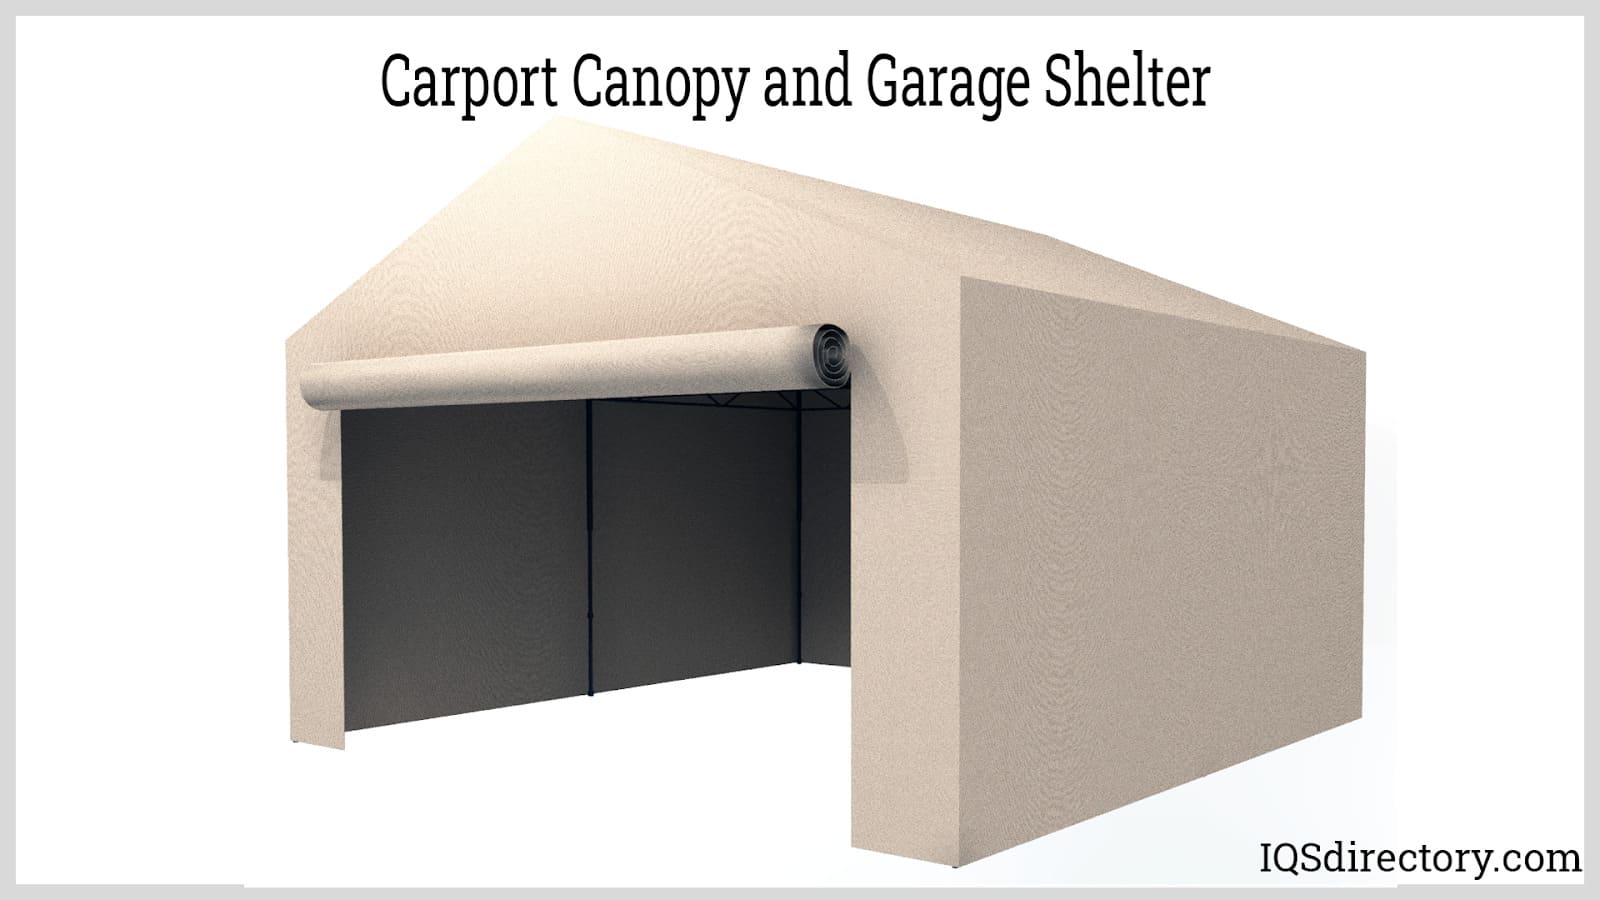 Carport Canopy and Garage Shelter